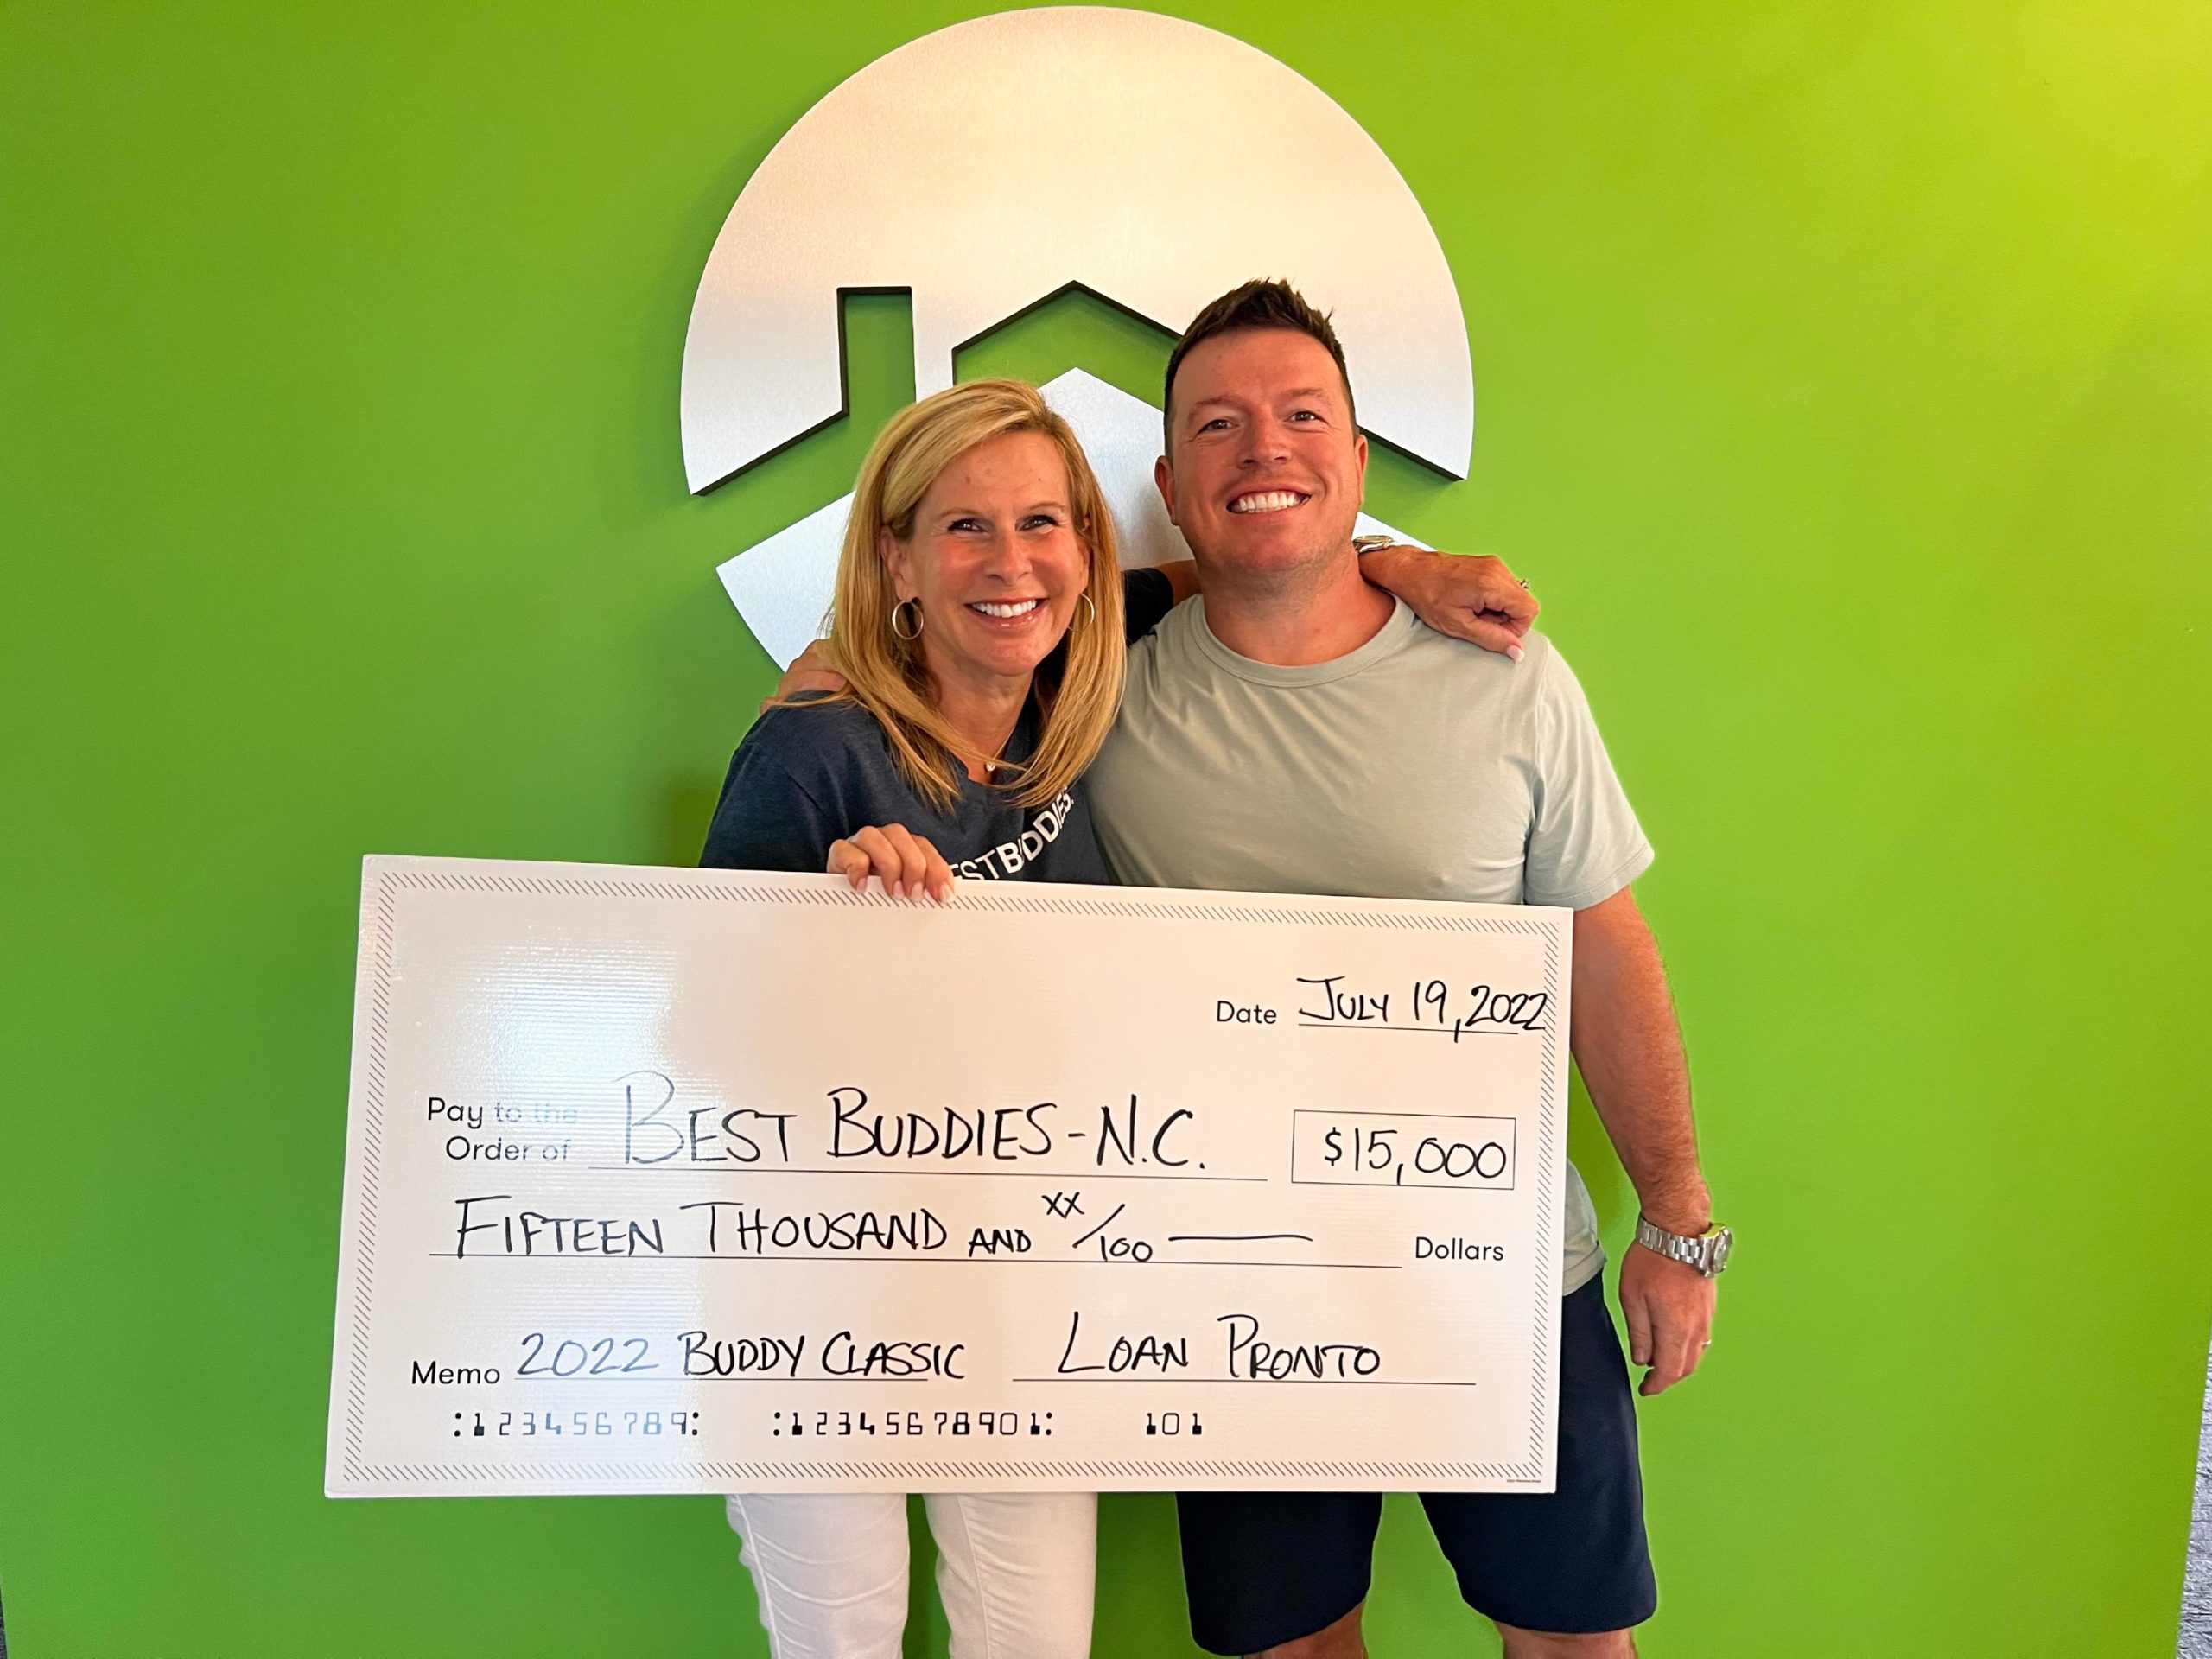 Roger Moore, President and Founder of Loan Pronto, with Tammy Medlock, State Director at Best Buddies in North Carolina.